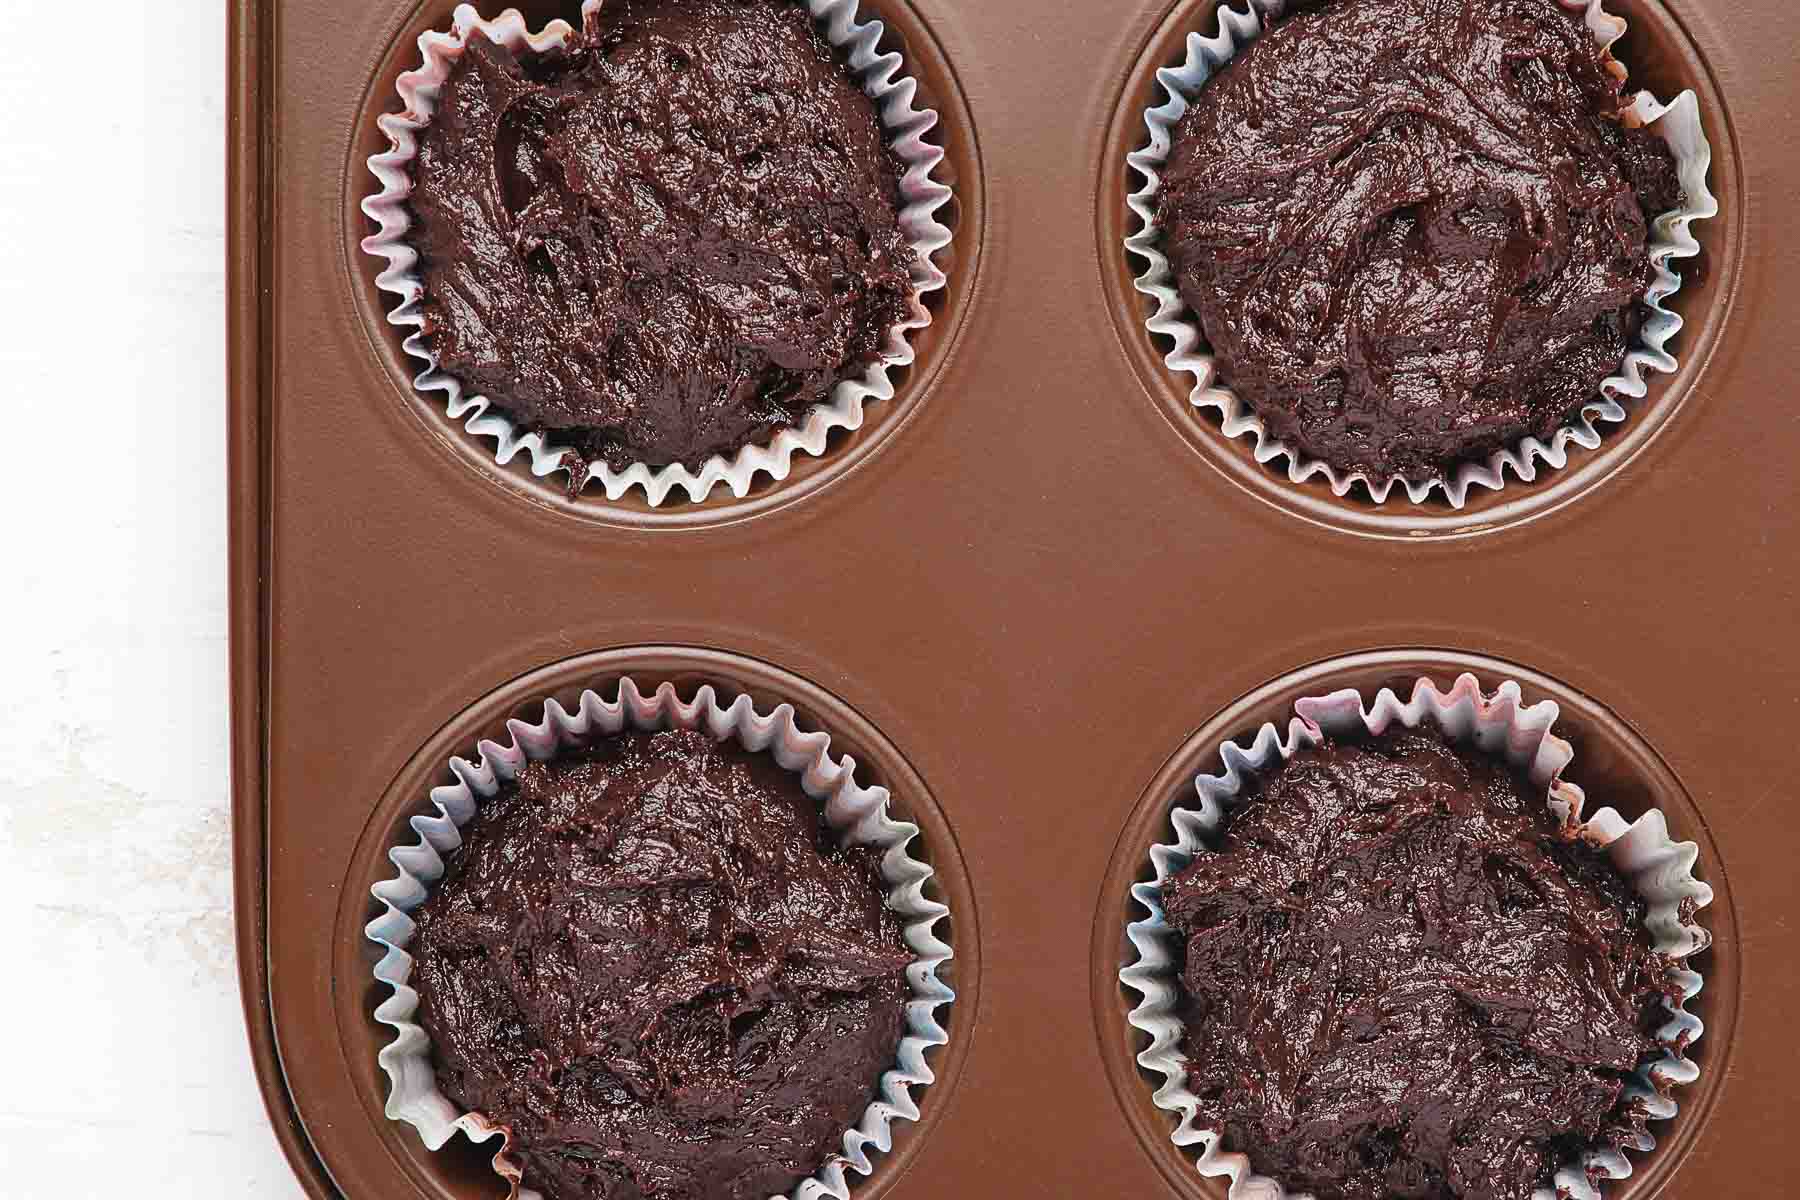 Four chocolate cupcakes, raw before baking.